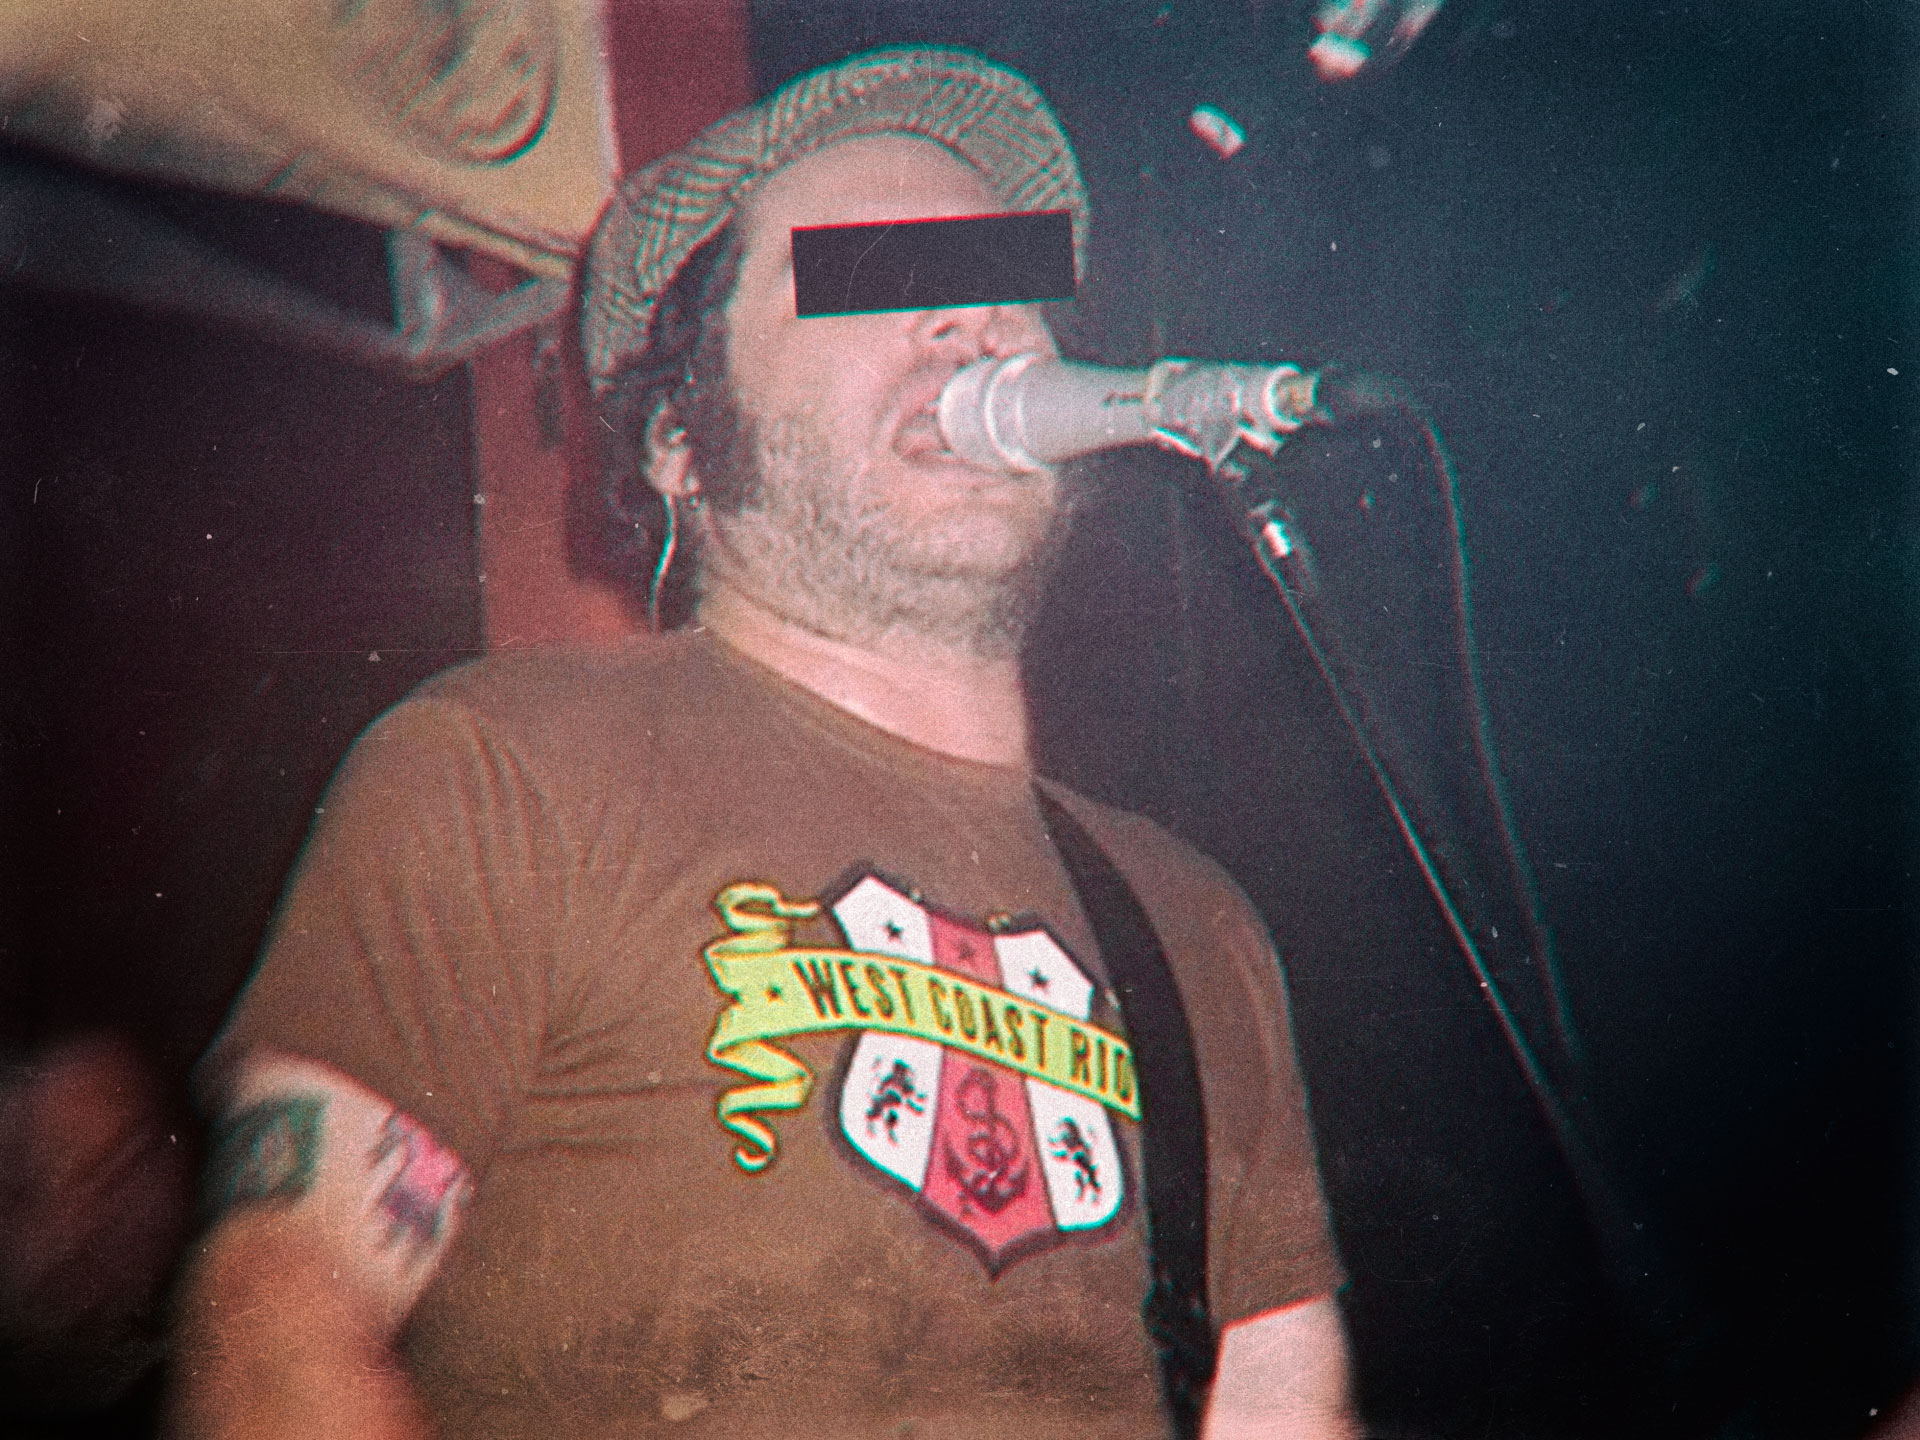 Fat Mike in a West Coast Riot t-shirt